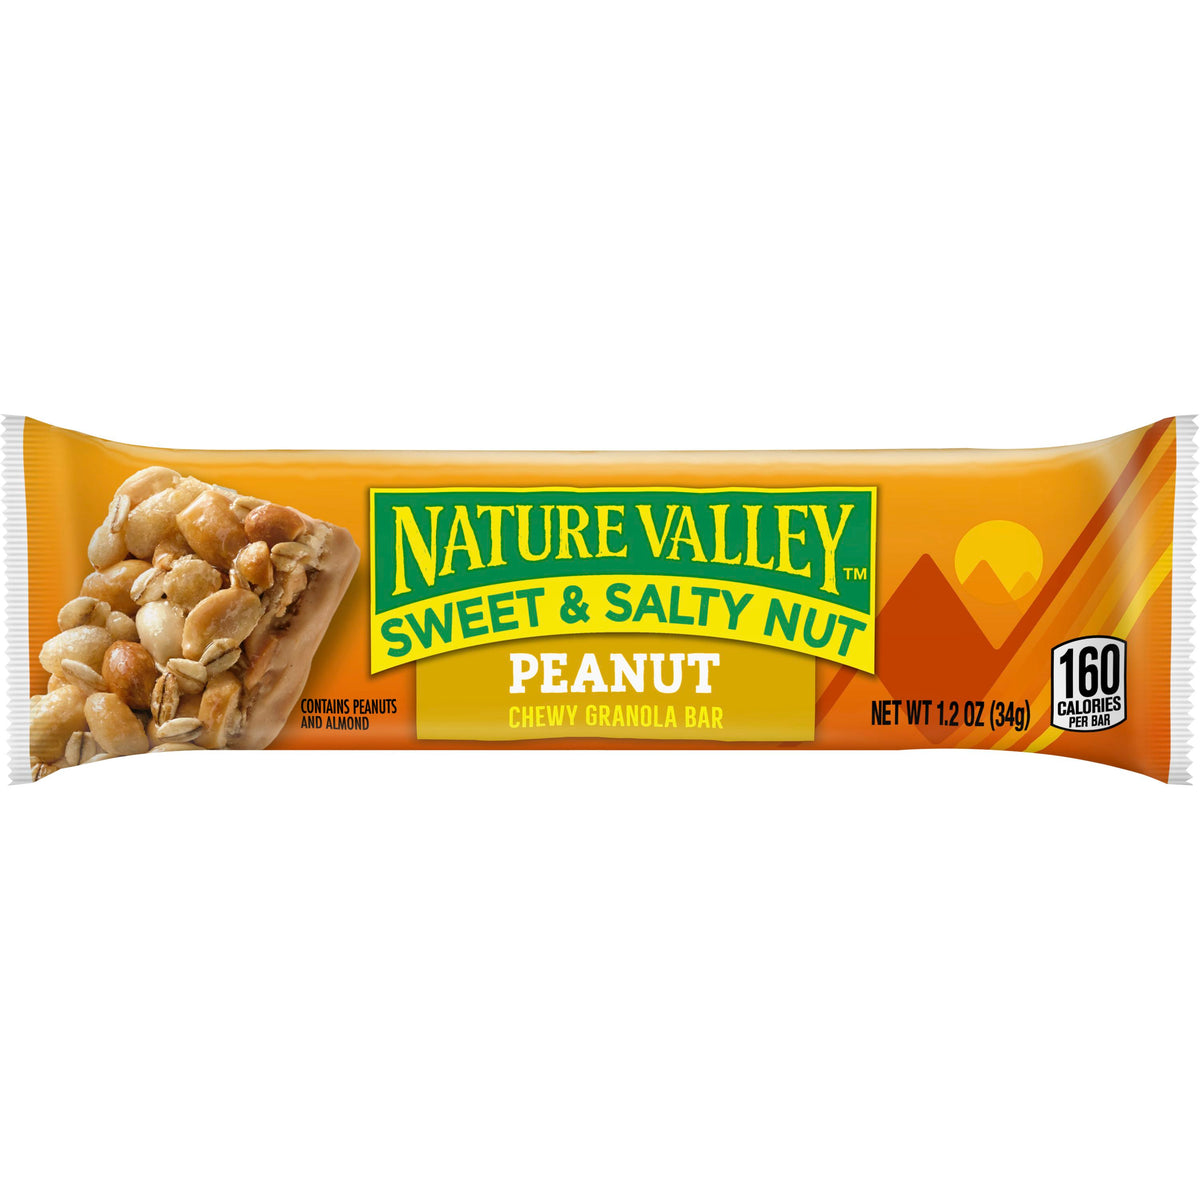 Nature Valley Sweet and Salty Nut Peanut Granola Bars, 1.2 oz